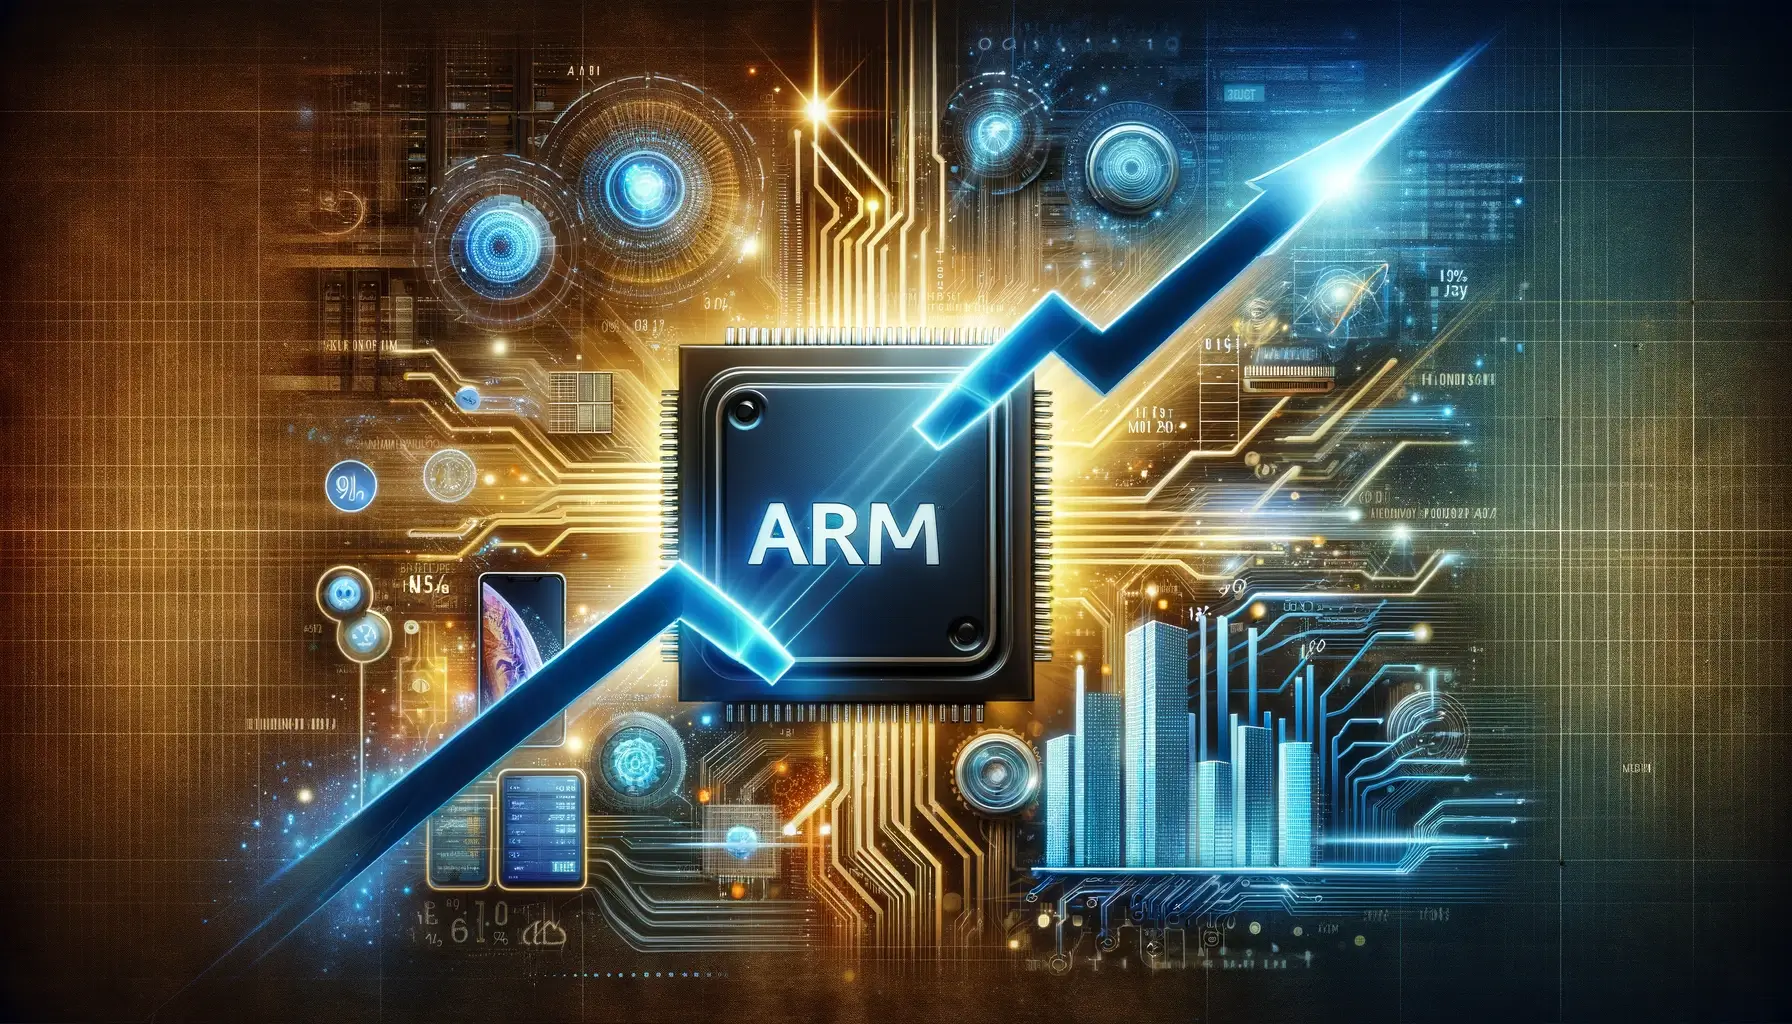 30% Increase in Arm Stock Fueled by Growing Demand for AI Chip Technology_